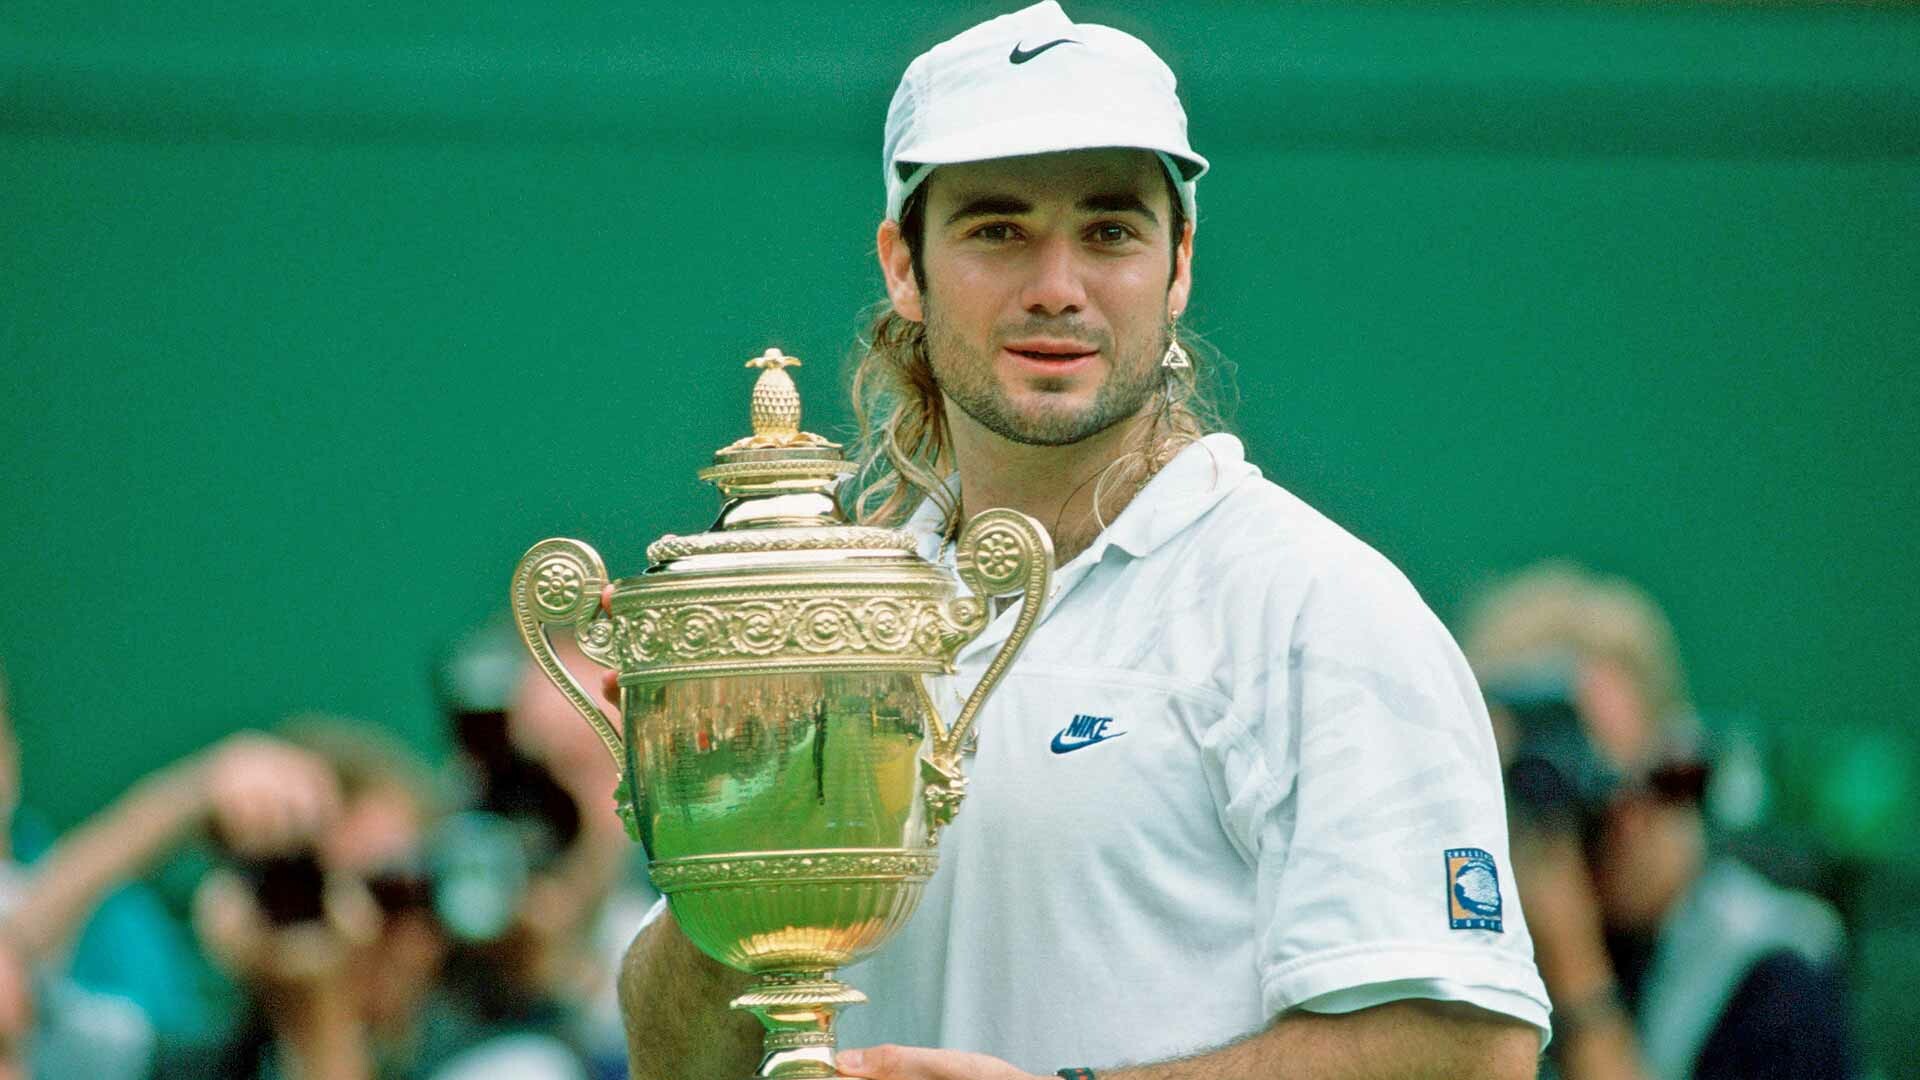 Andre Agassi: He defeated Goran Ivanisevic in a five-set final of 1992 Wimbledon, ATP. 1920x1080 Full HD Background.